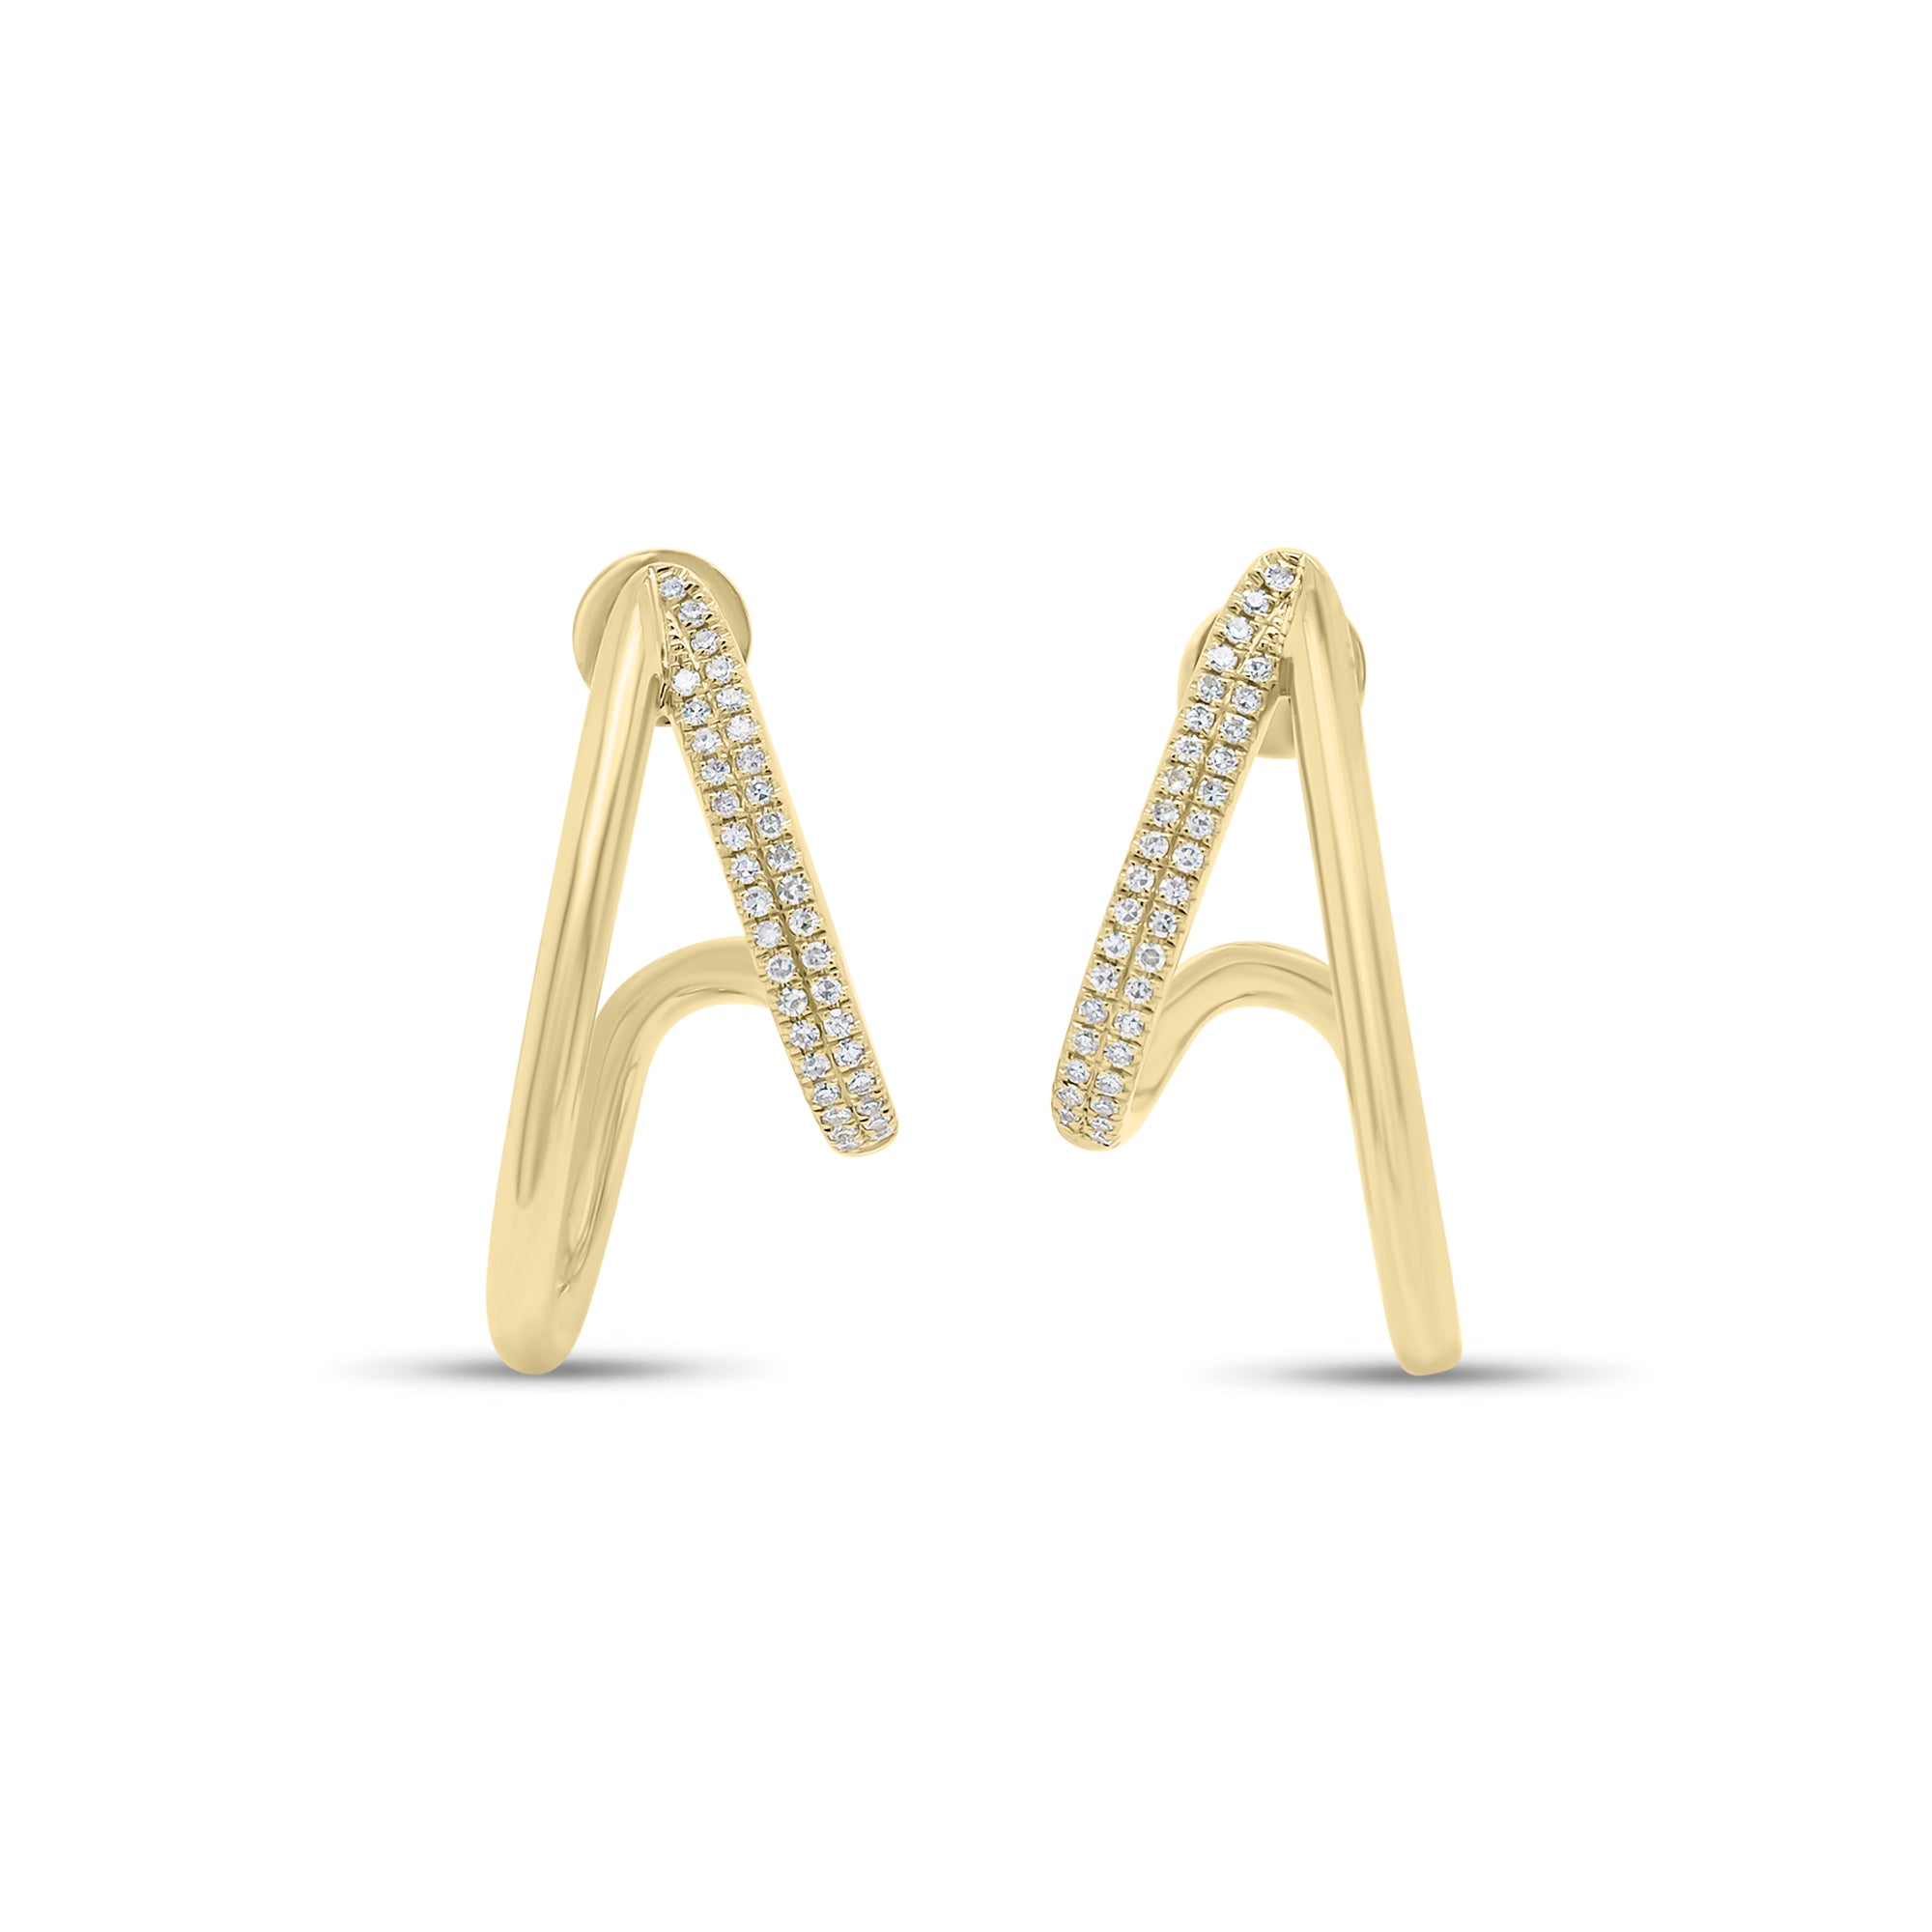 Diamond Abstract Earrings - 14K gold weighing 5.54 grams  - 74 round diamonds weighing 0.20 carats